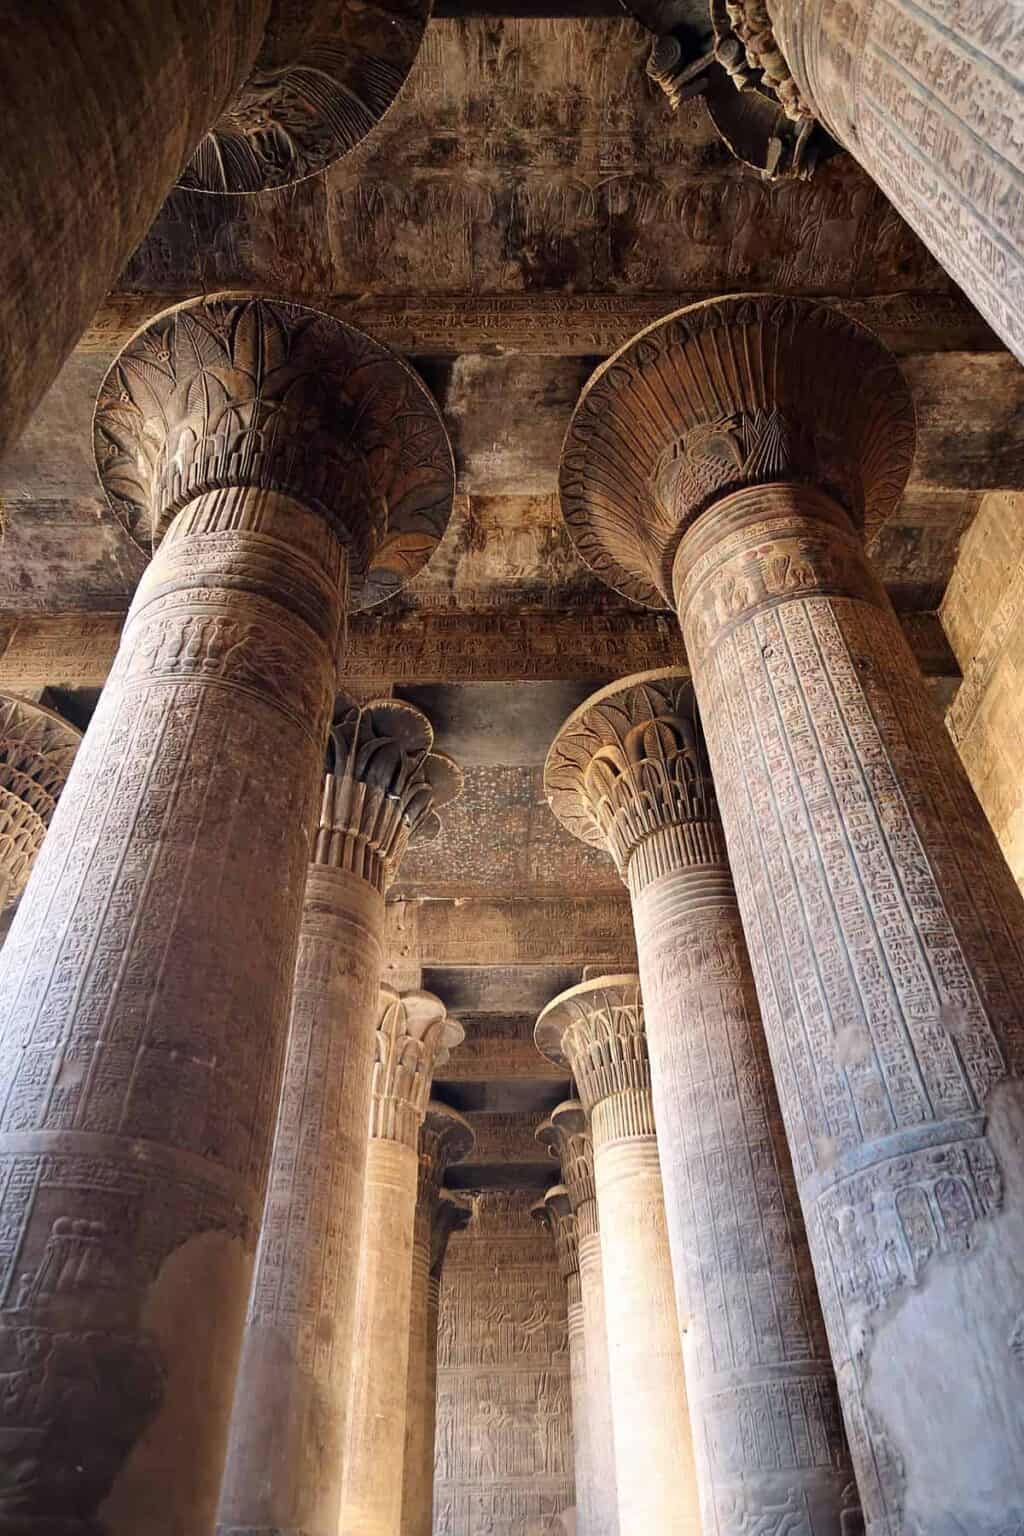 Esna is one of the most beautiful temples in Upper Egypt